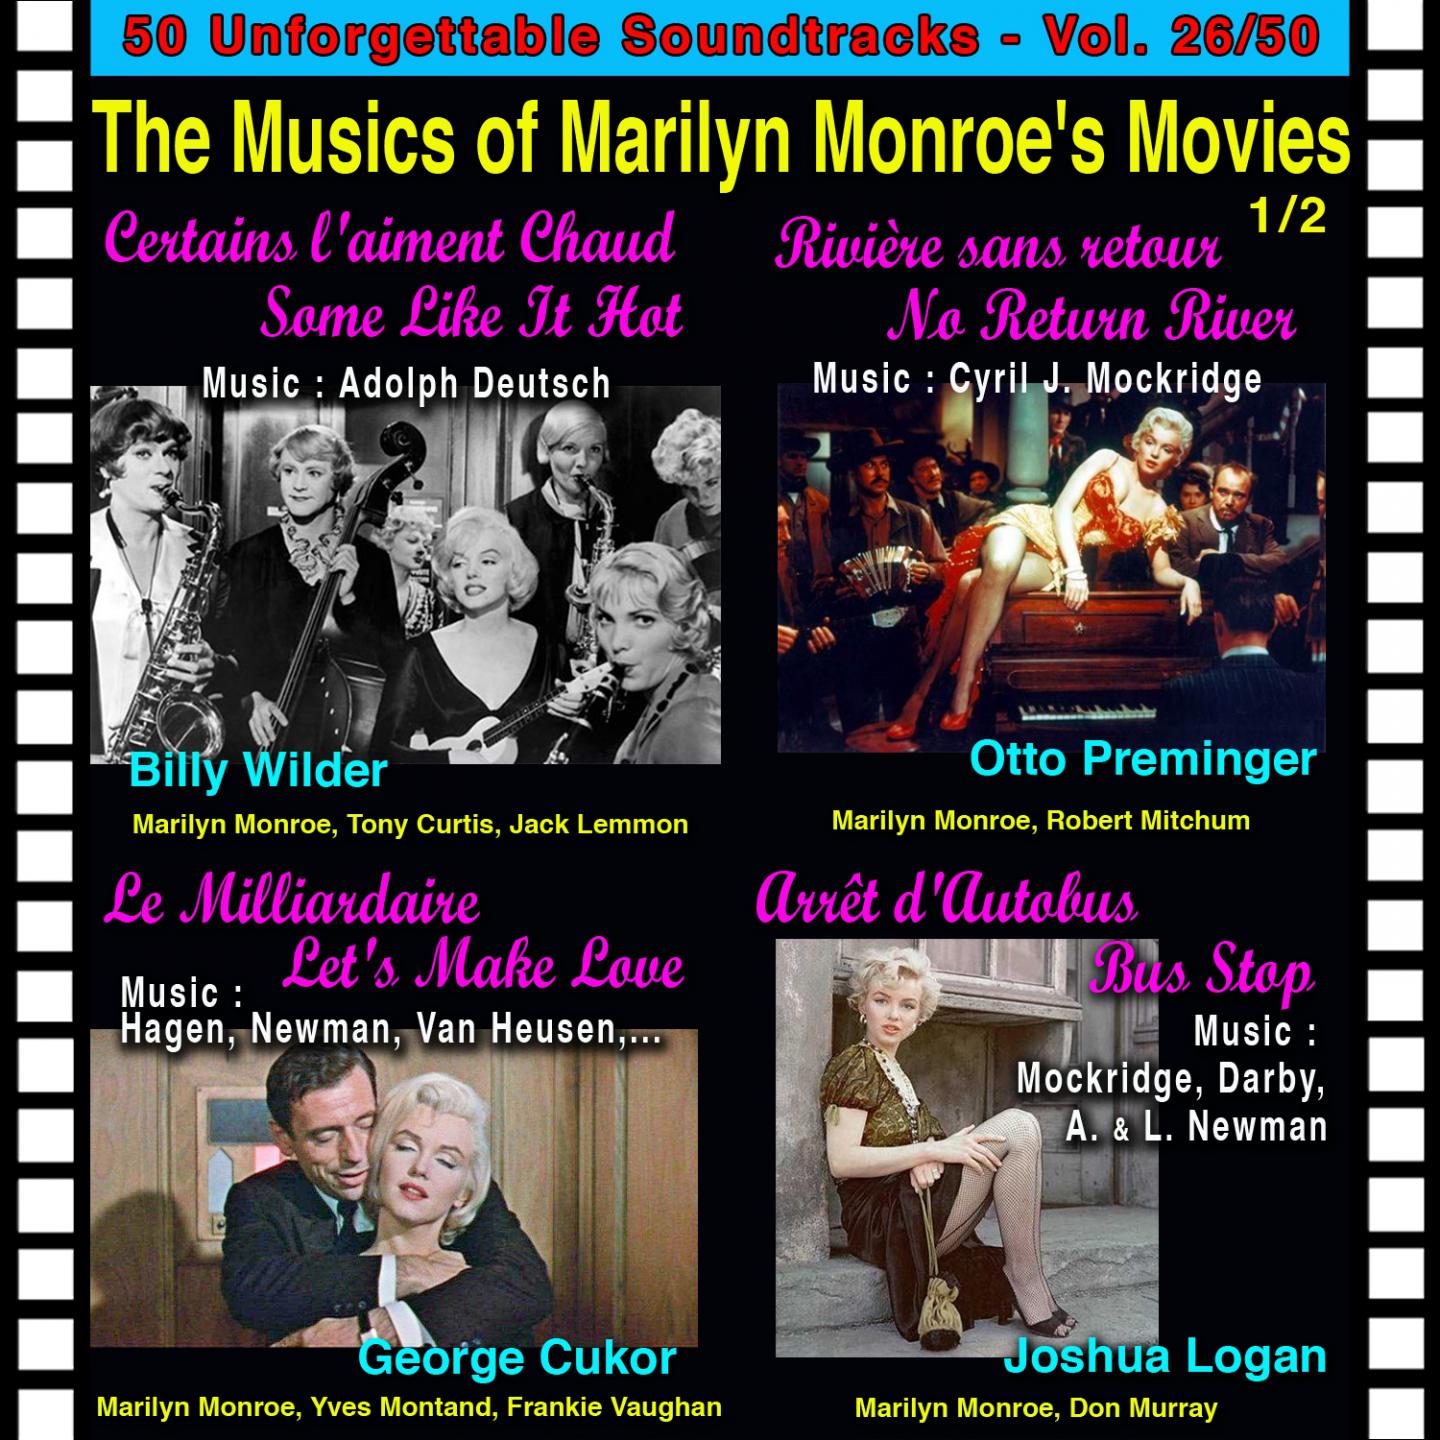 Certains L'aiment Chaud / Some Like It Hot: I'm Thru with Love (Marilyn Music Movies (1 / 2))